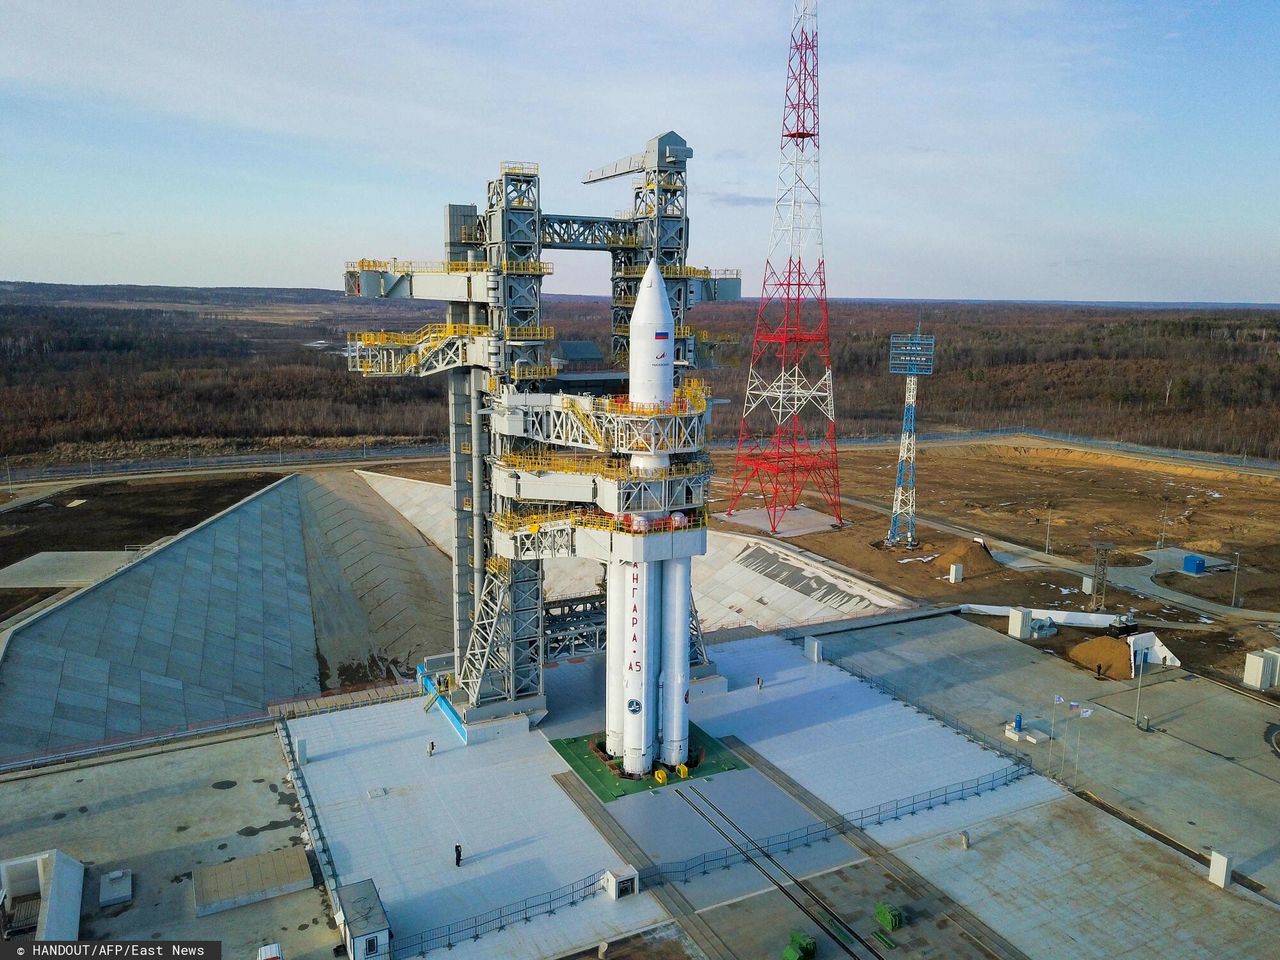 The Angara A5 rocket on the launch pad of the Vostochny Cosmodrome.